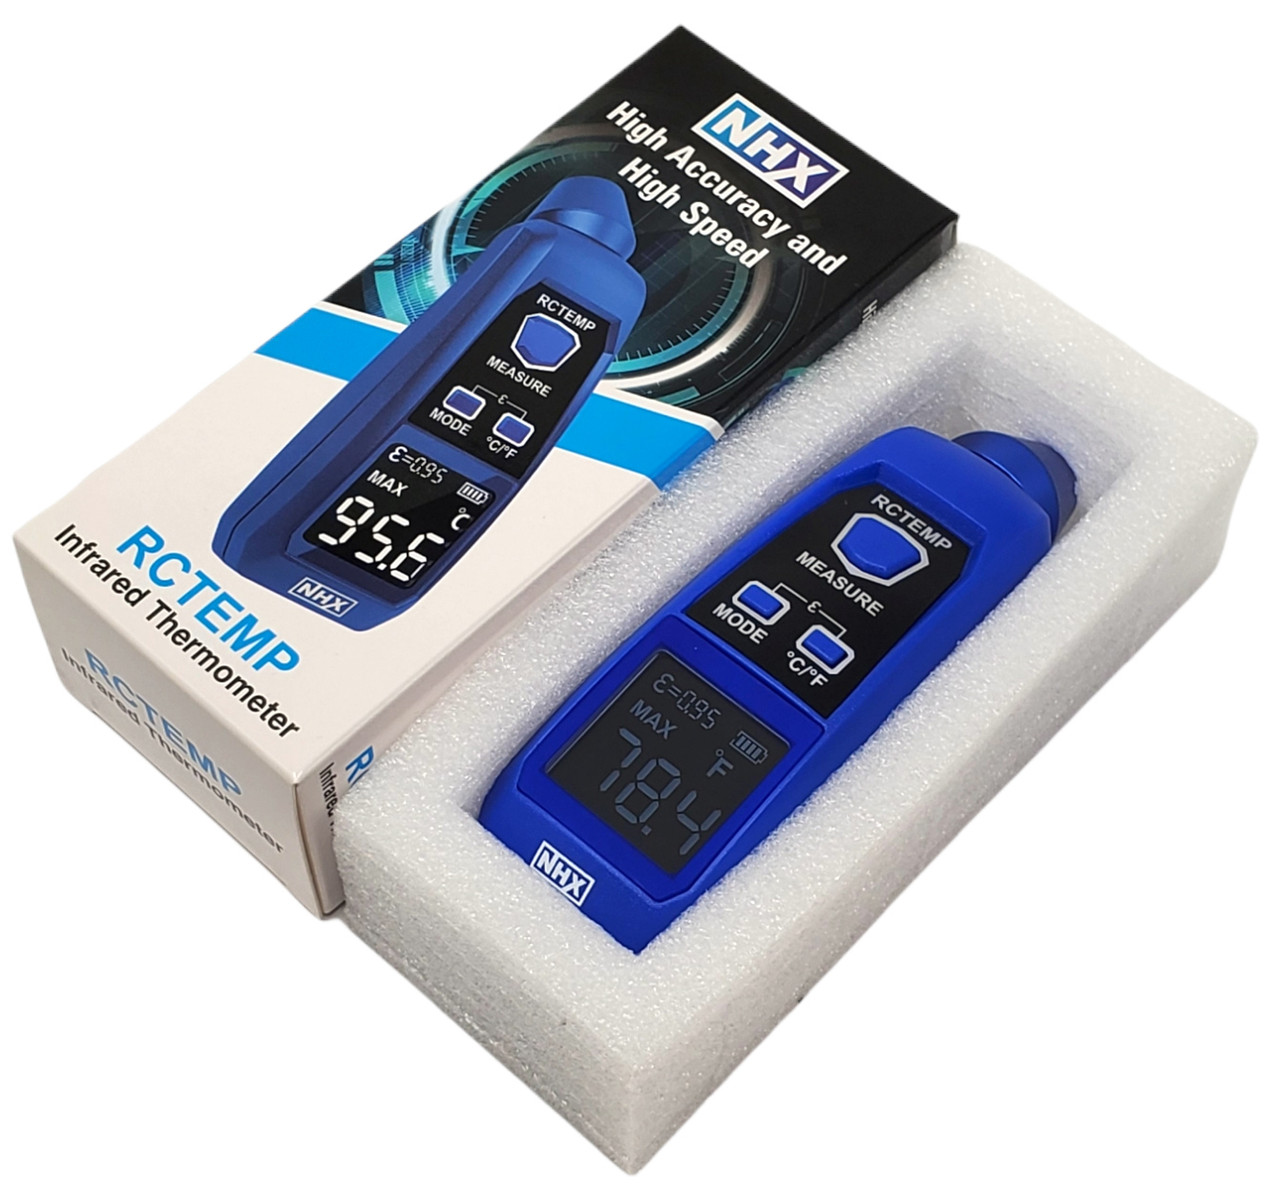 Dynamite DYNF1055 Infrared Temp Gun Thermometer with Laser Sight